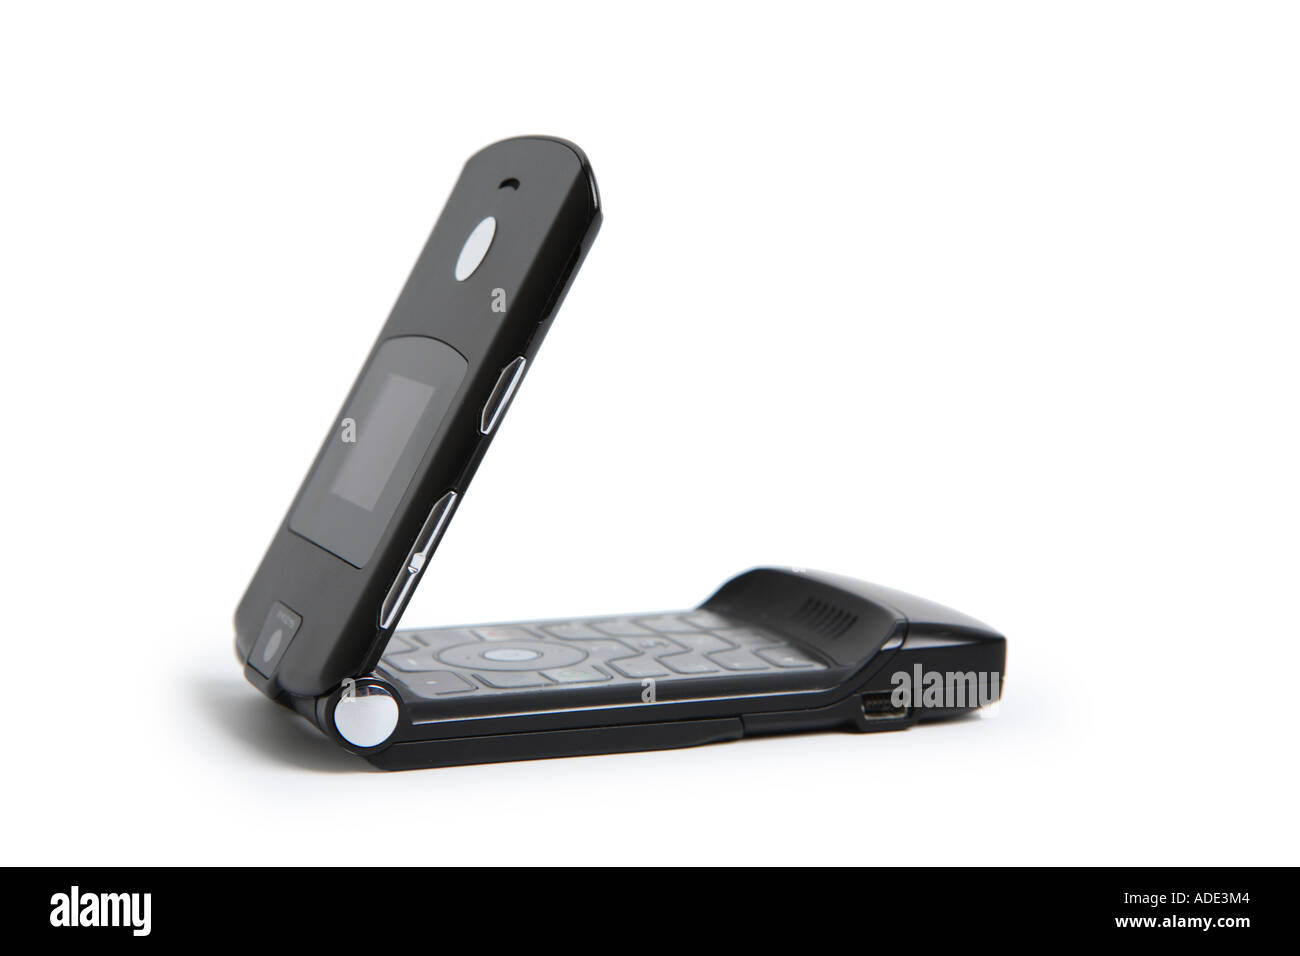 Foldable cell phone Stock Photo